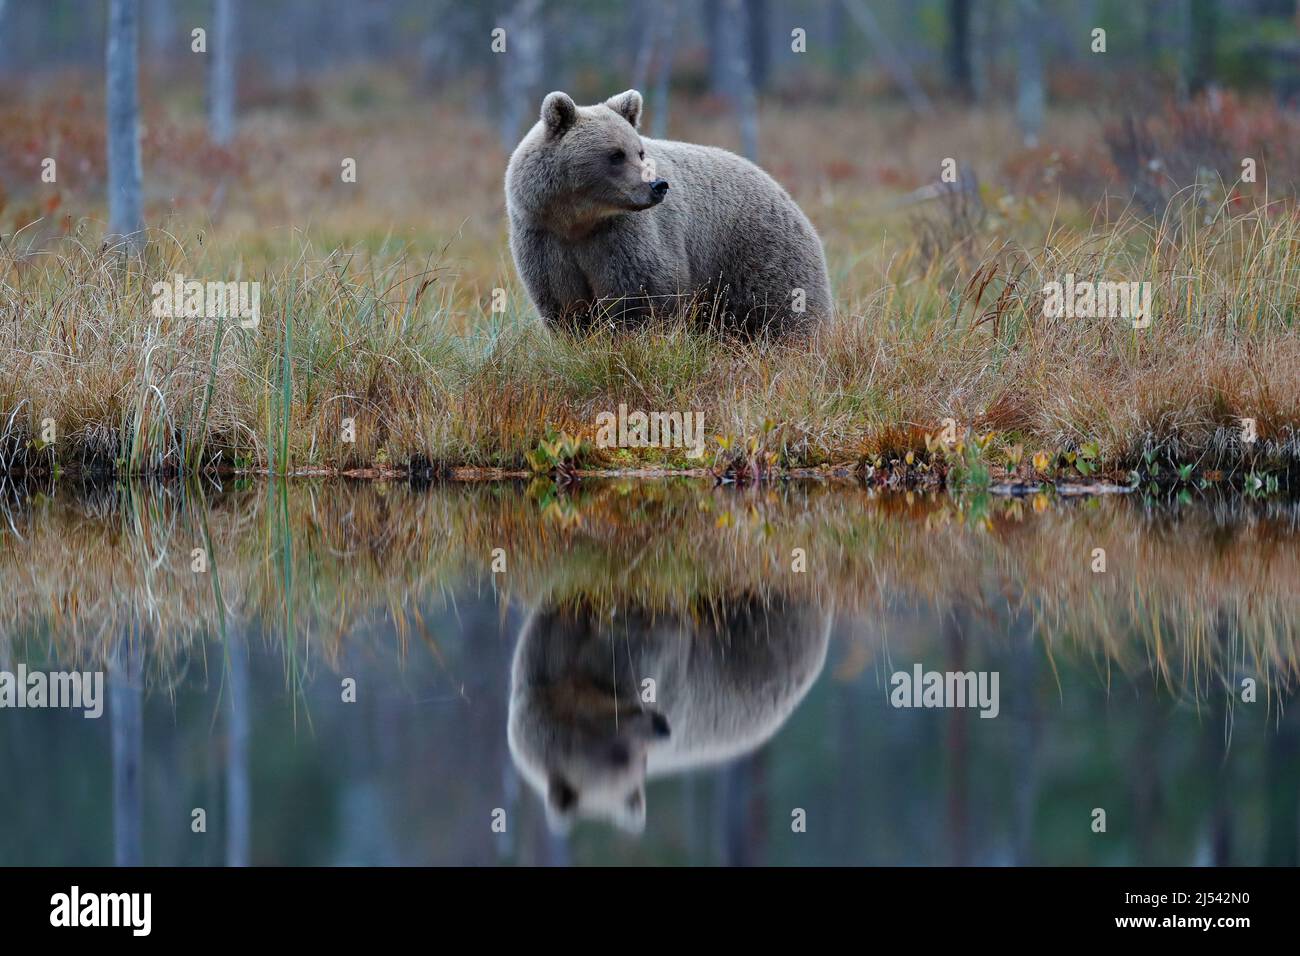 Summer wildlife. Bear walking,  forest with cotton grass.  Dangerous animal in nature forest and meadow habitat. Wildlife scene from Finland near Russ Stock Photo